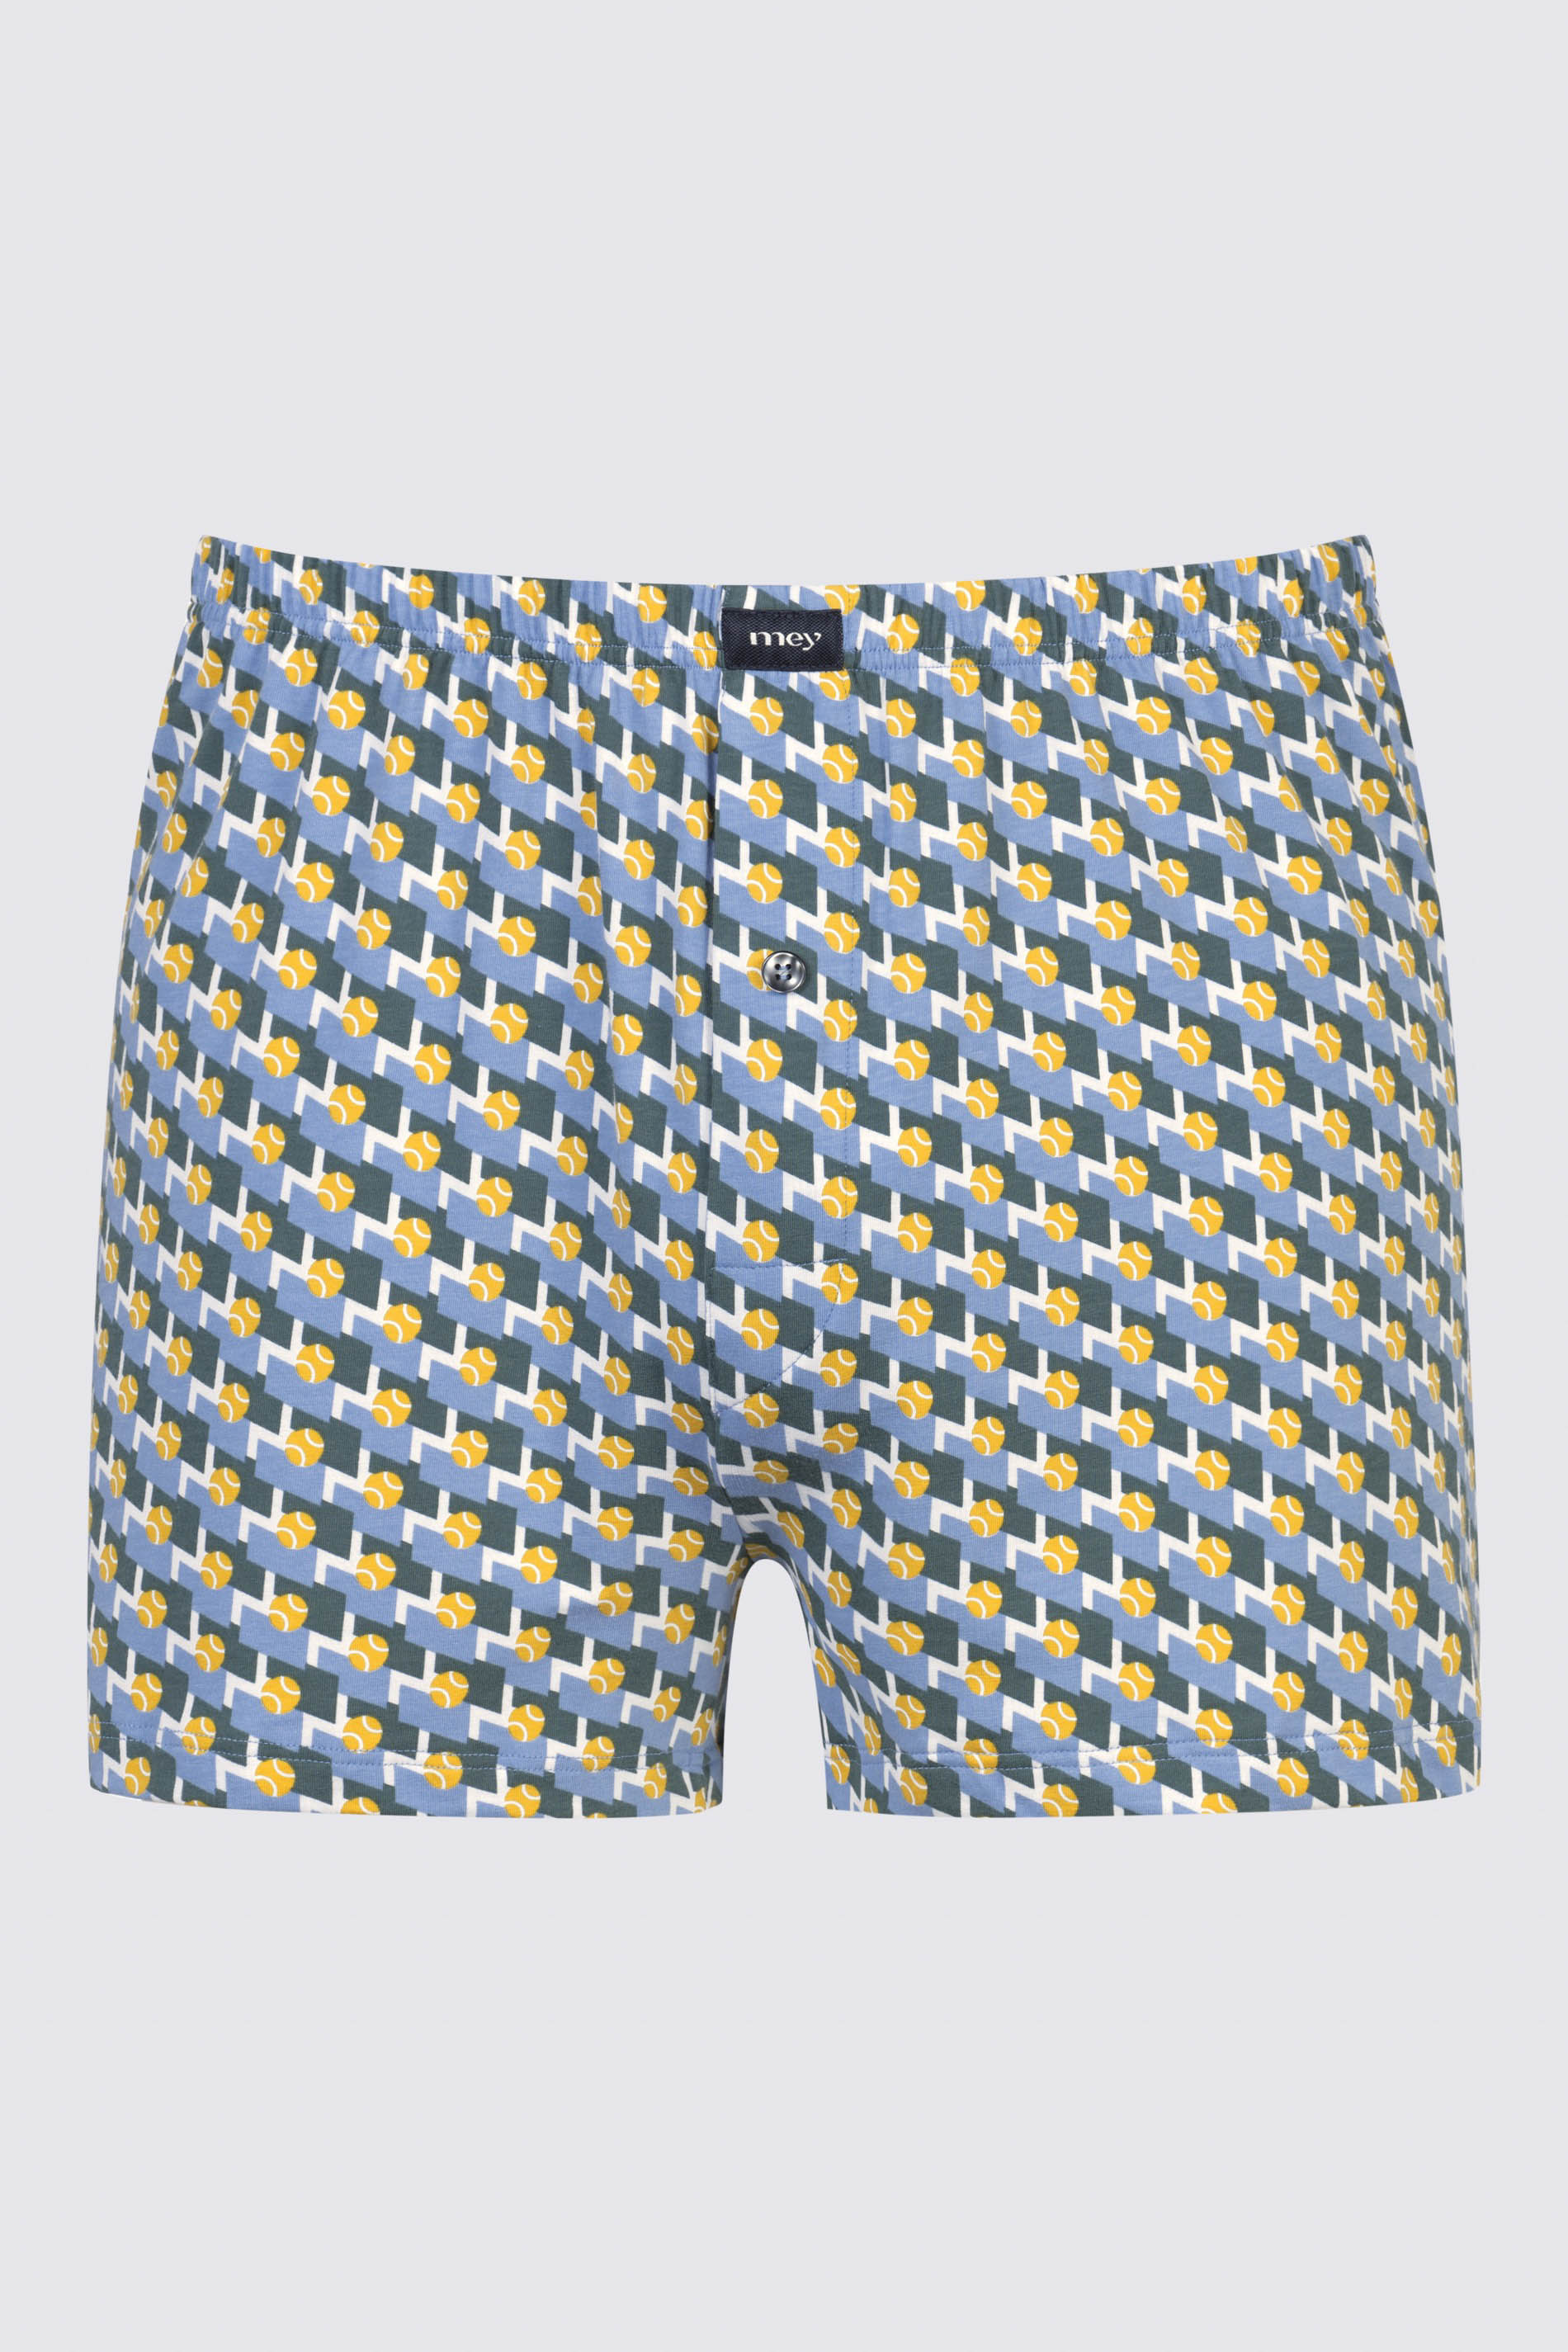 Boxer shorts Serie Tennis Uitknippen | mey®